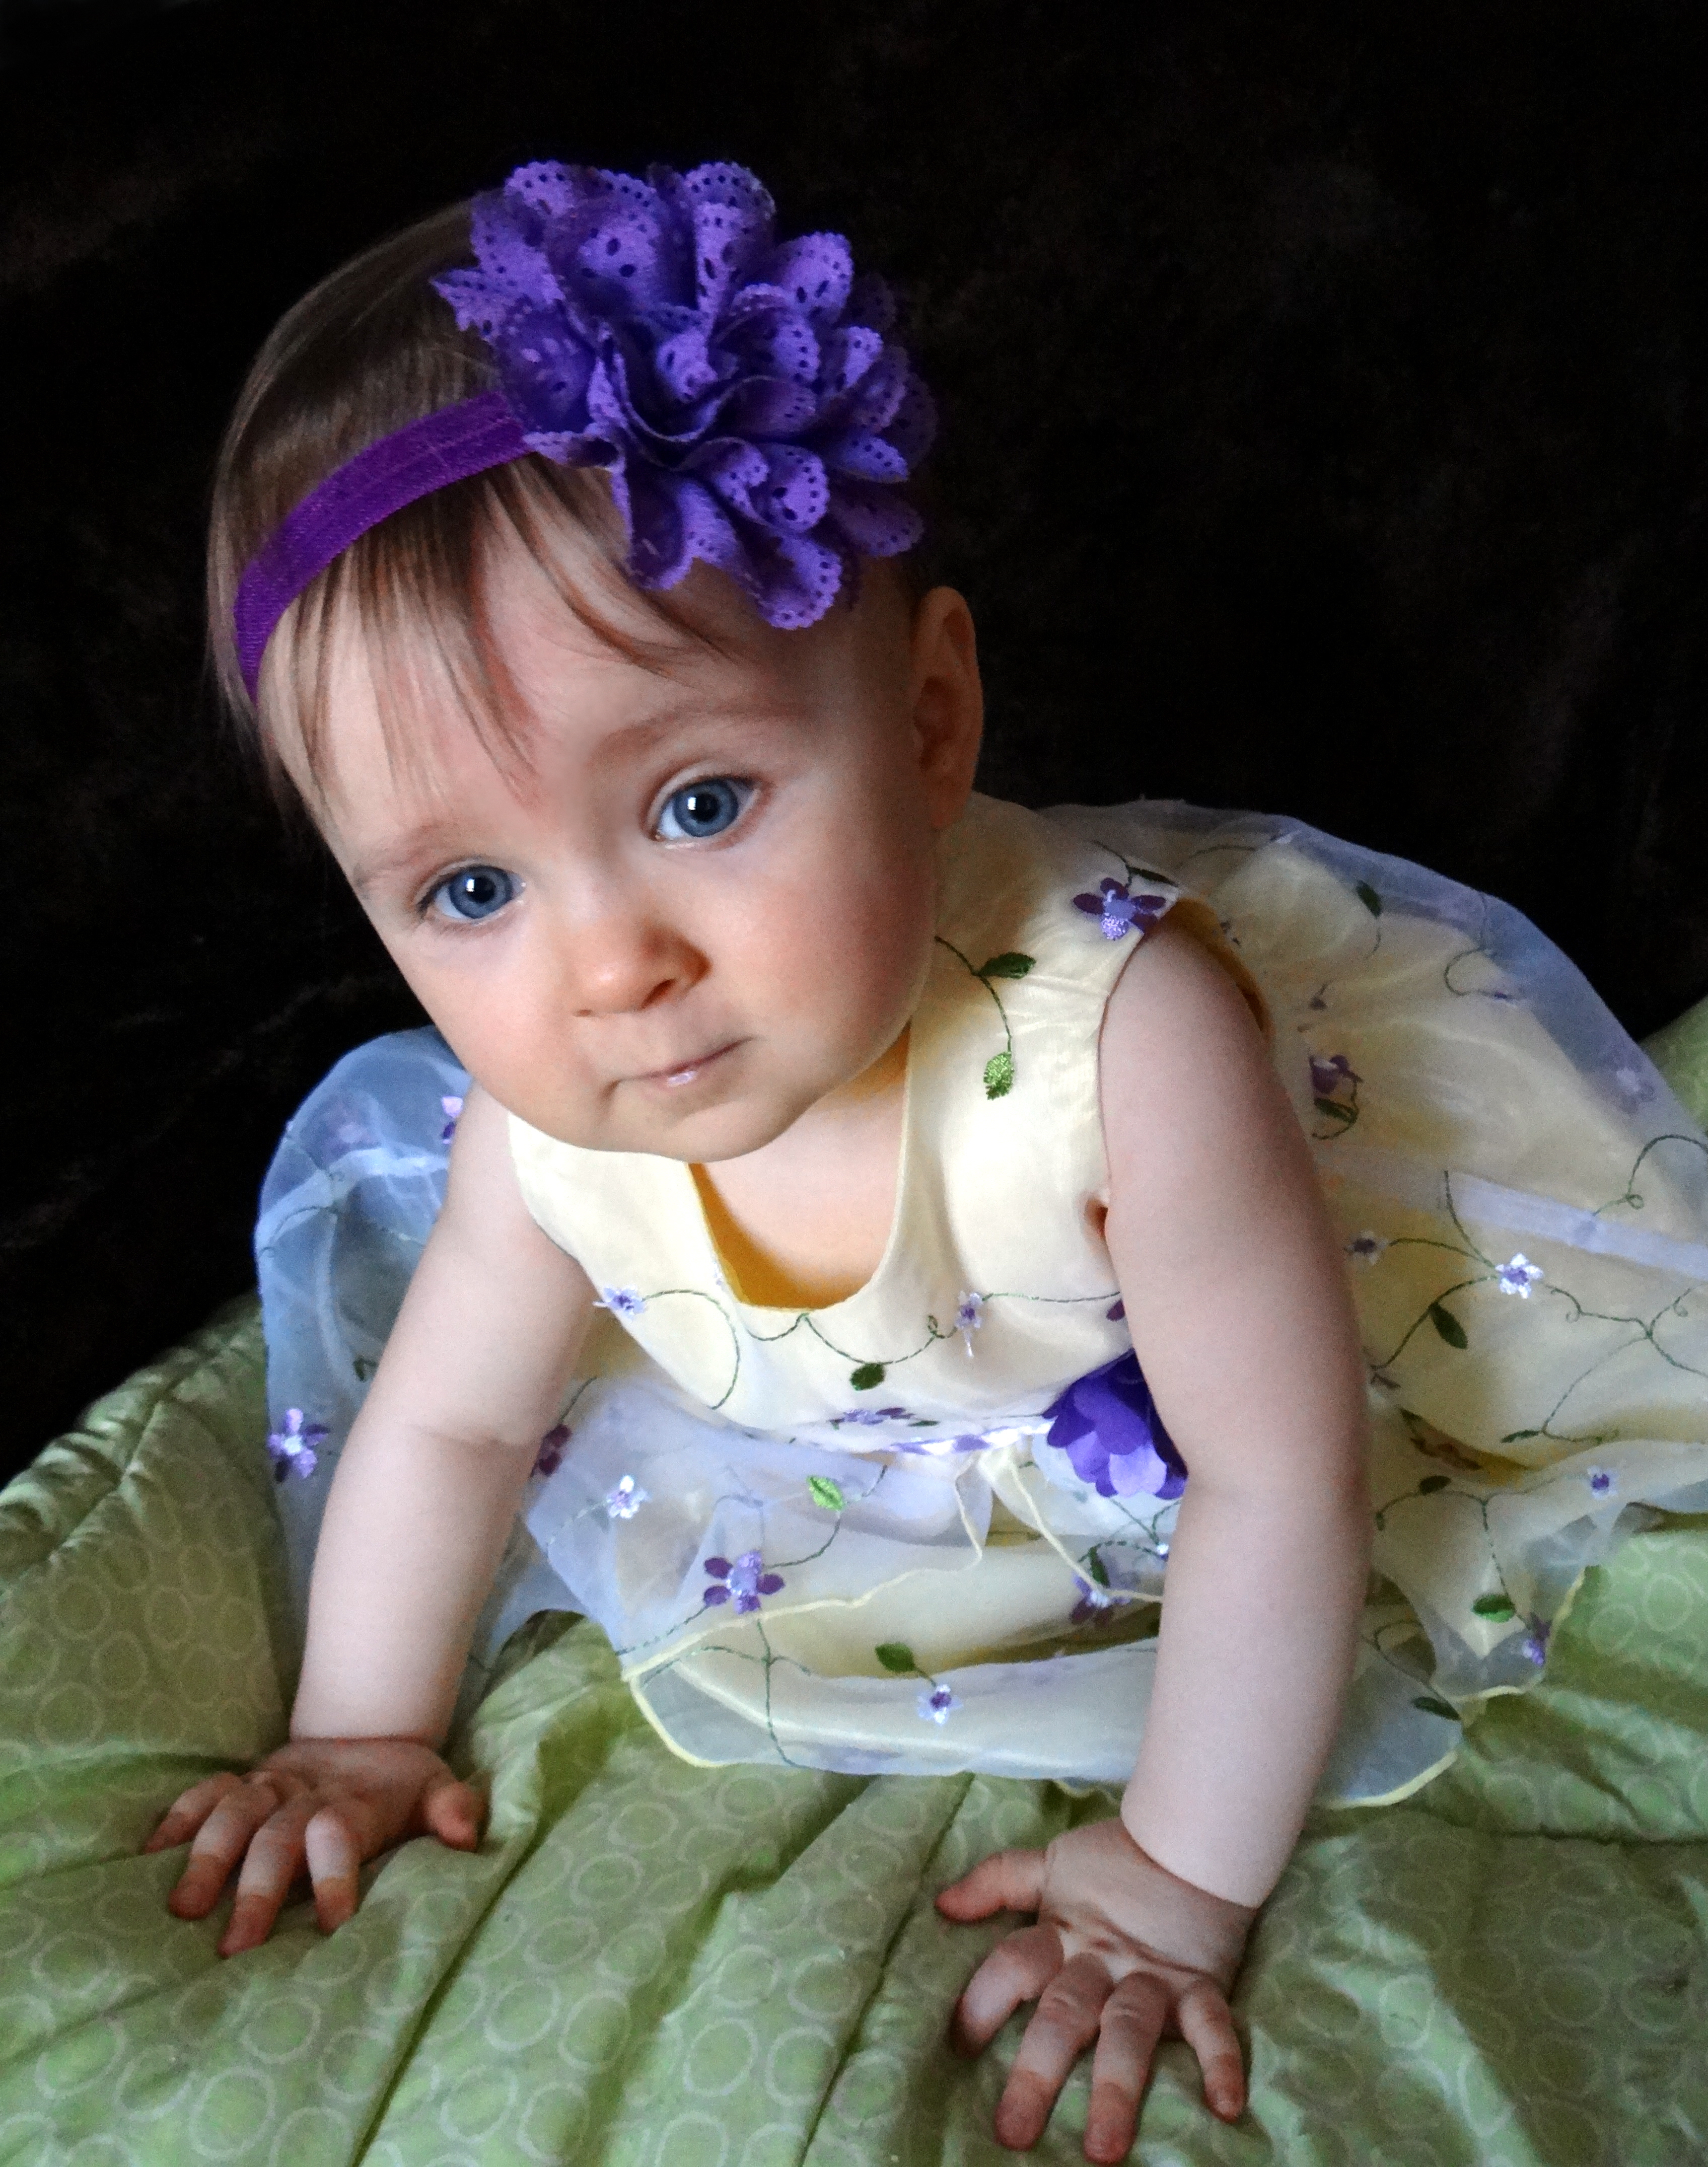 Baby dressed up in yellow dress with purple flowers